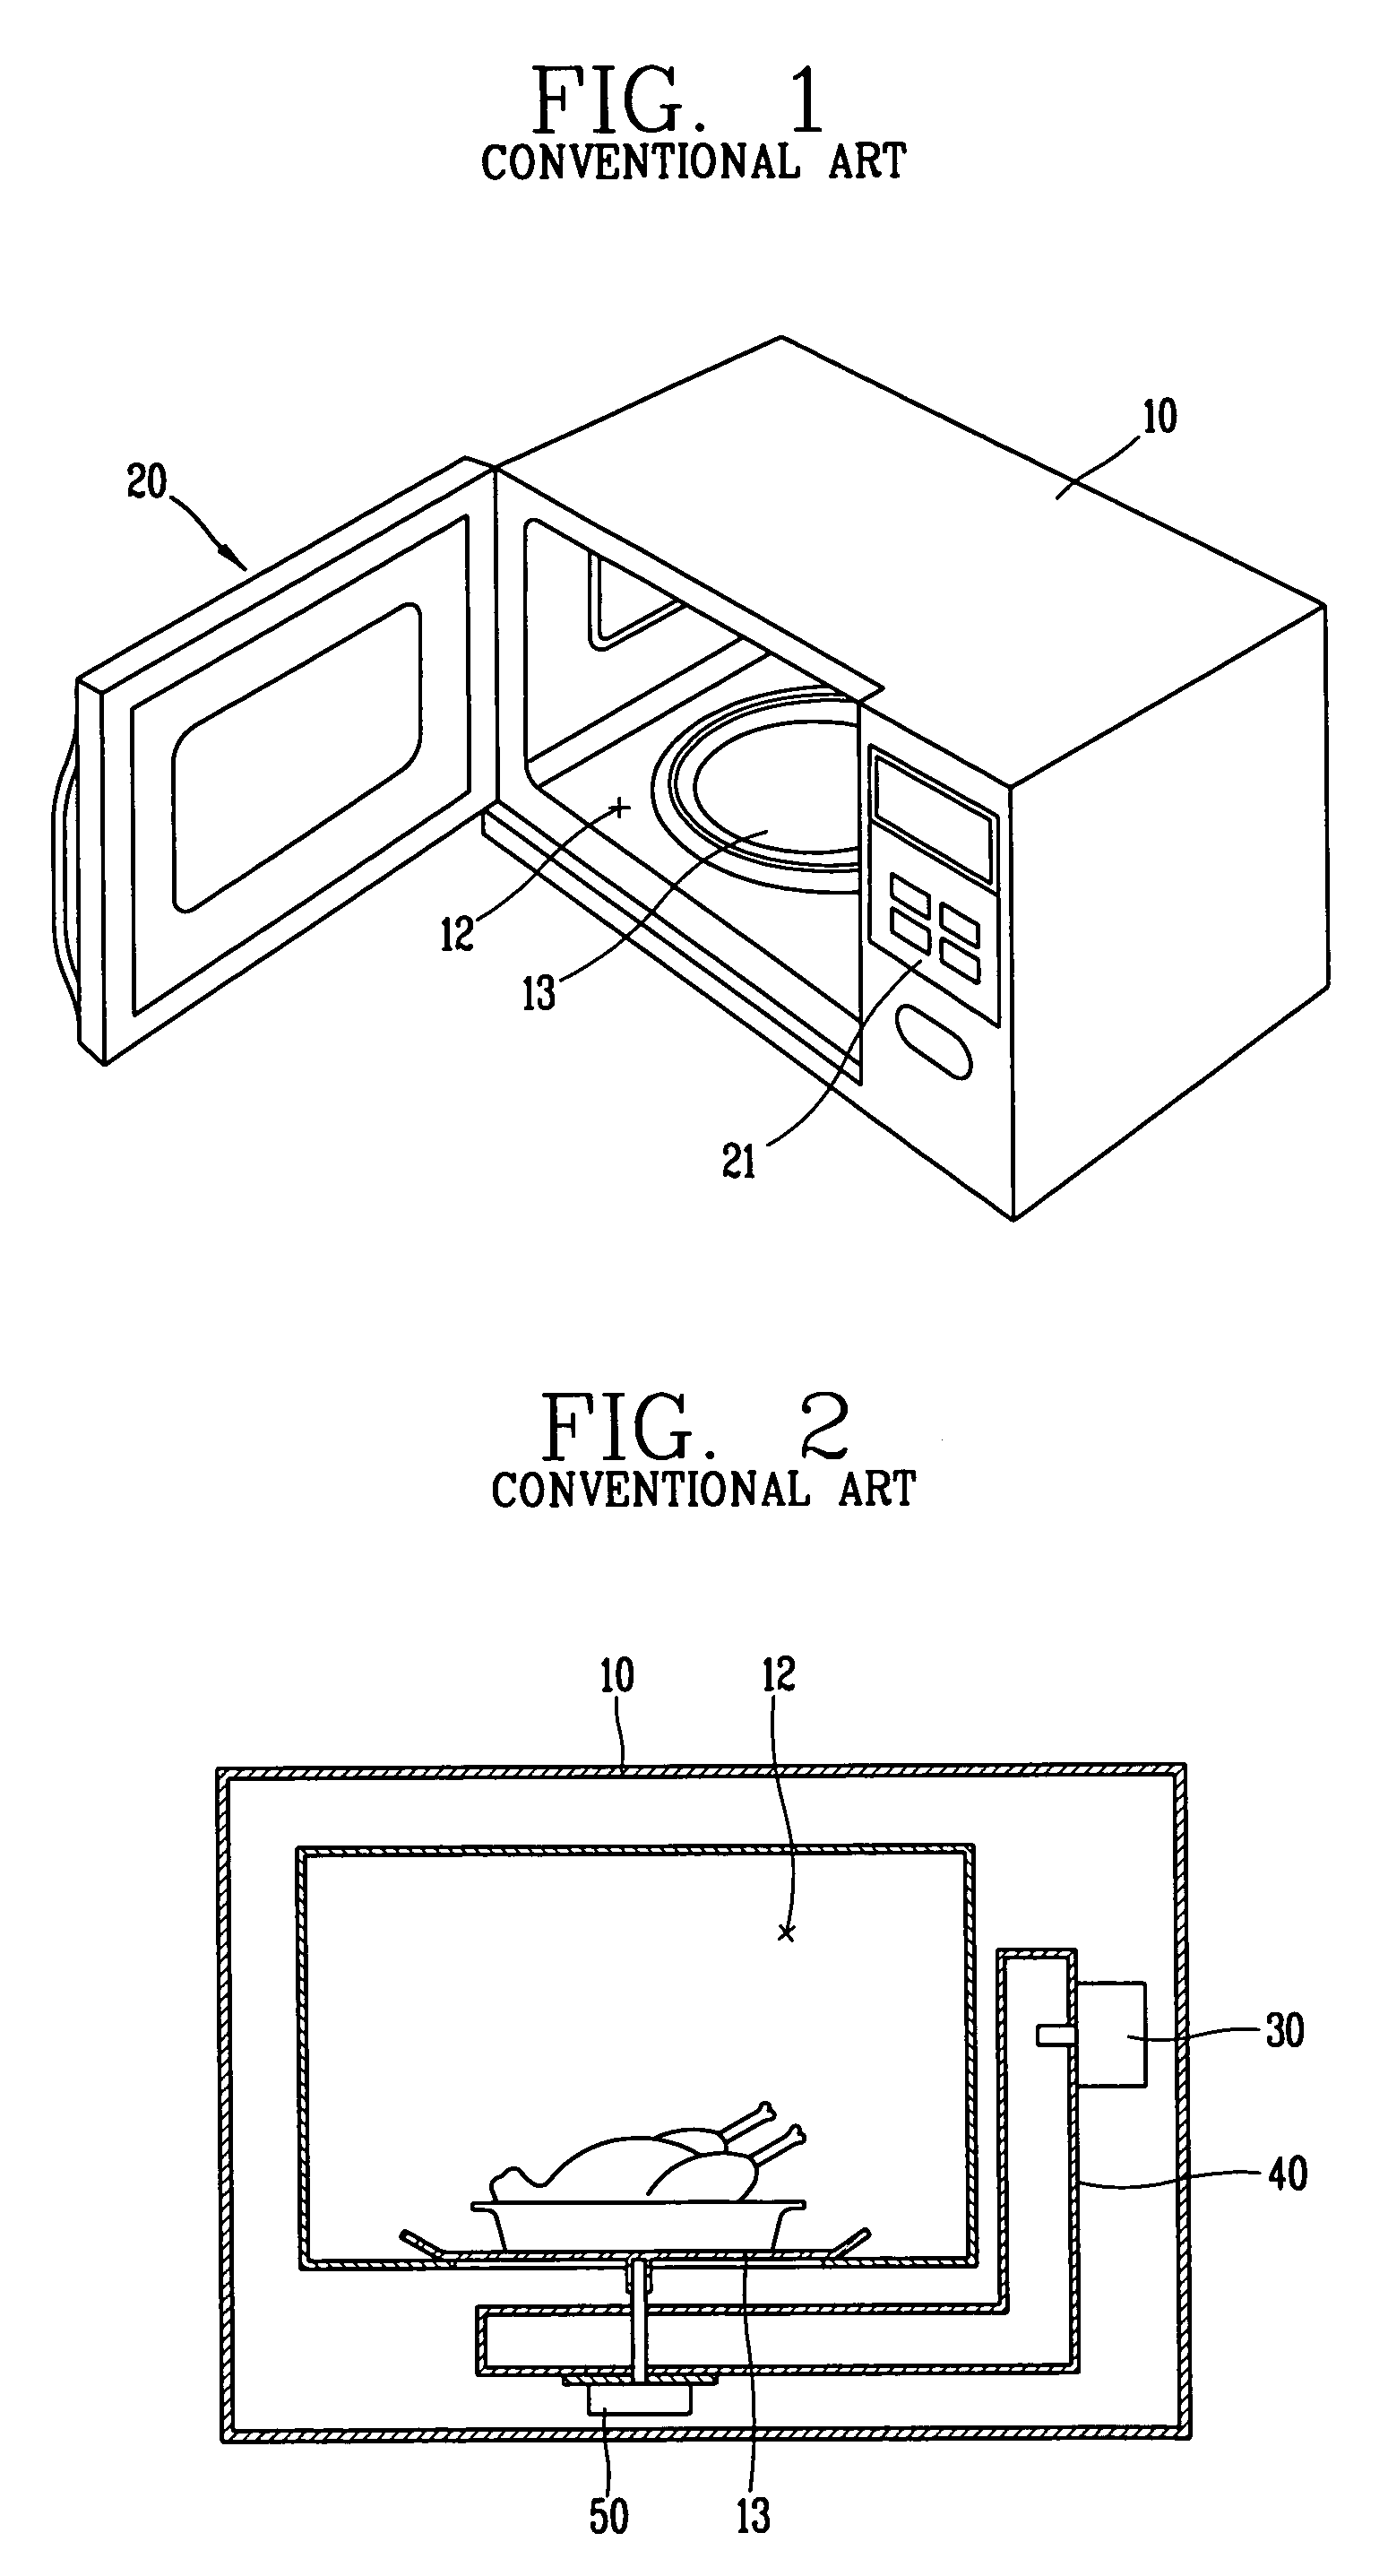 Microwave cooker having antenna in cooperation with movable stirrer